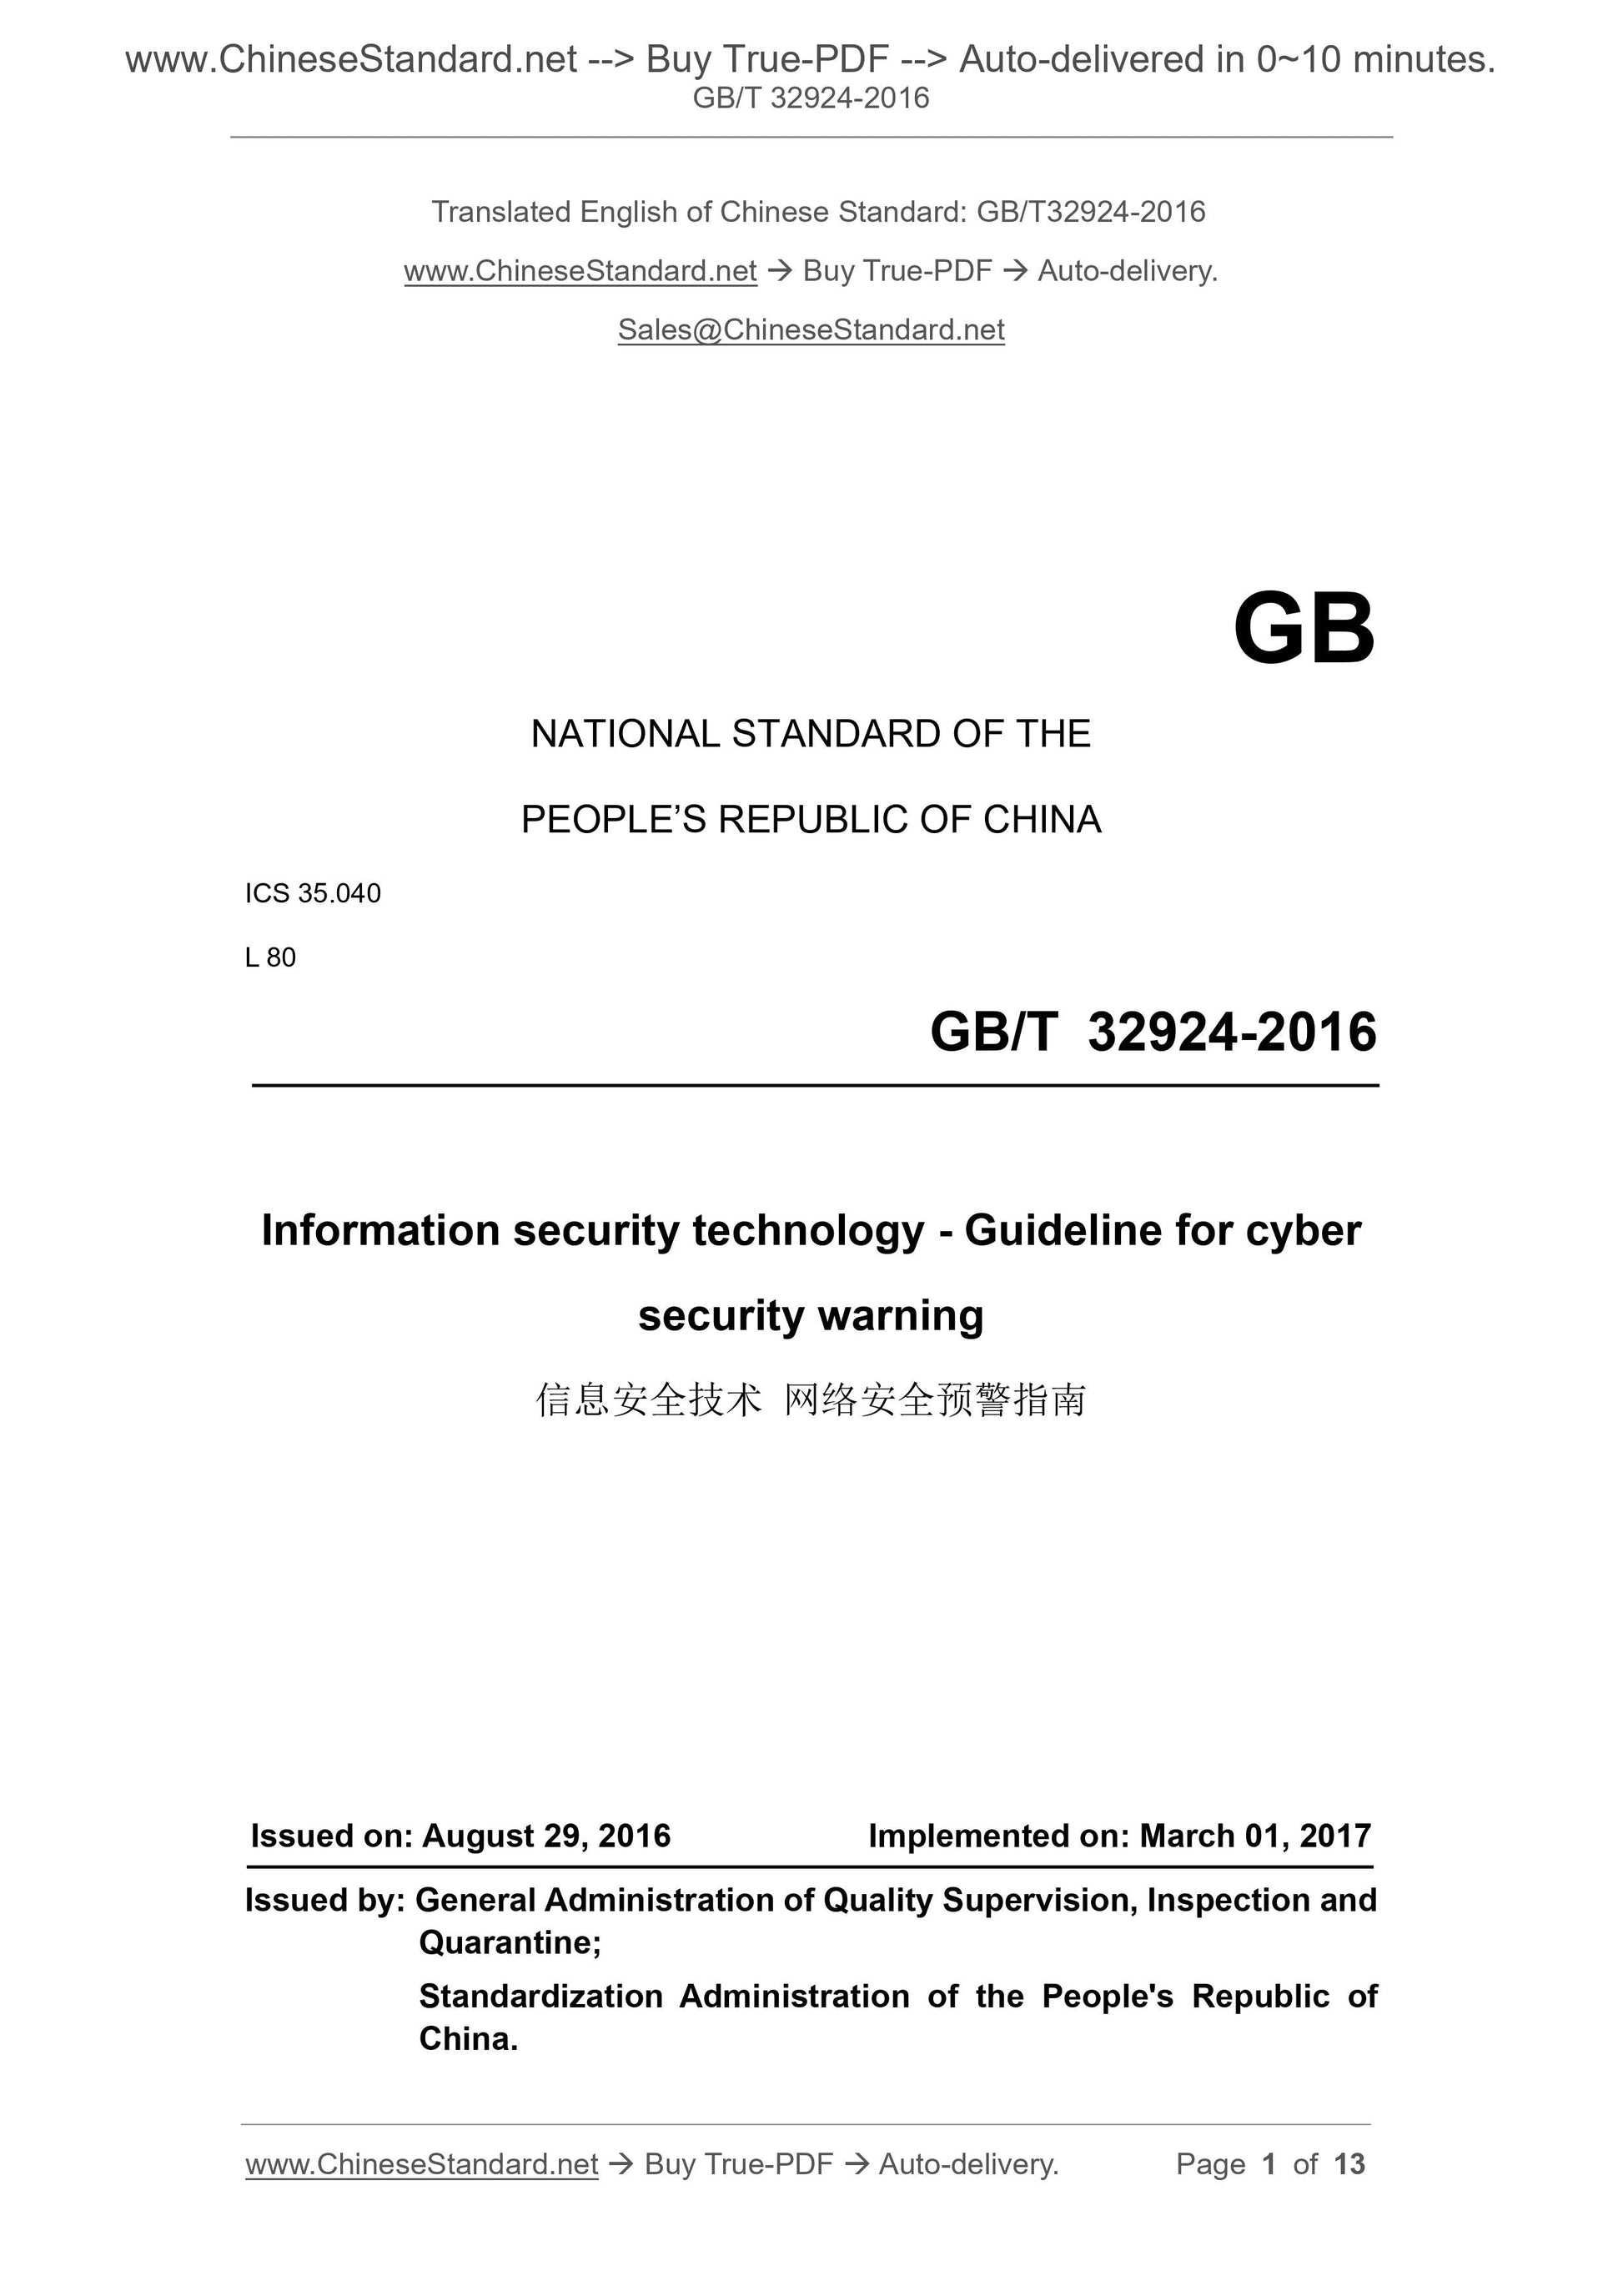 GB/T 32924-2016 Page 1